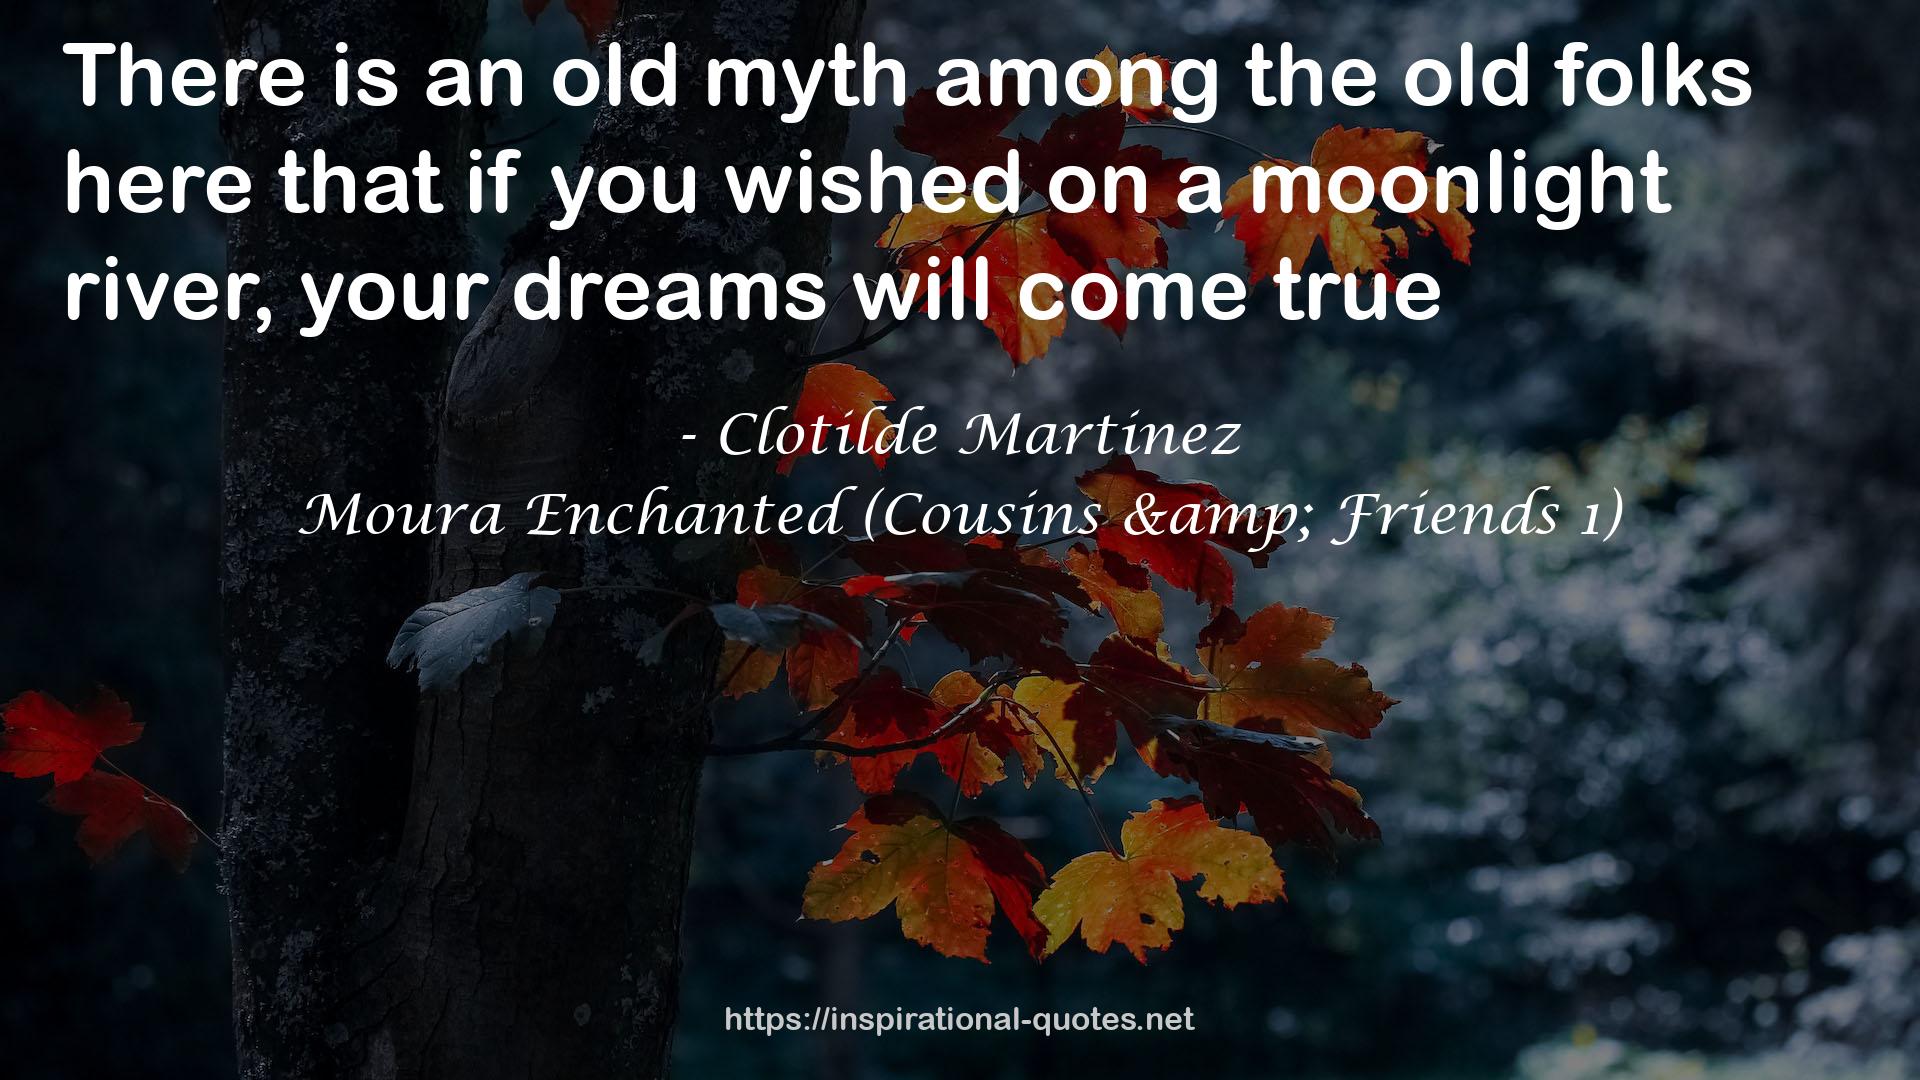 Moura Enchanted (Cousins & Friends 1) QUOTES